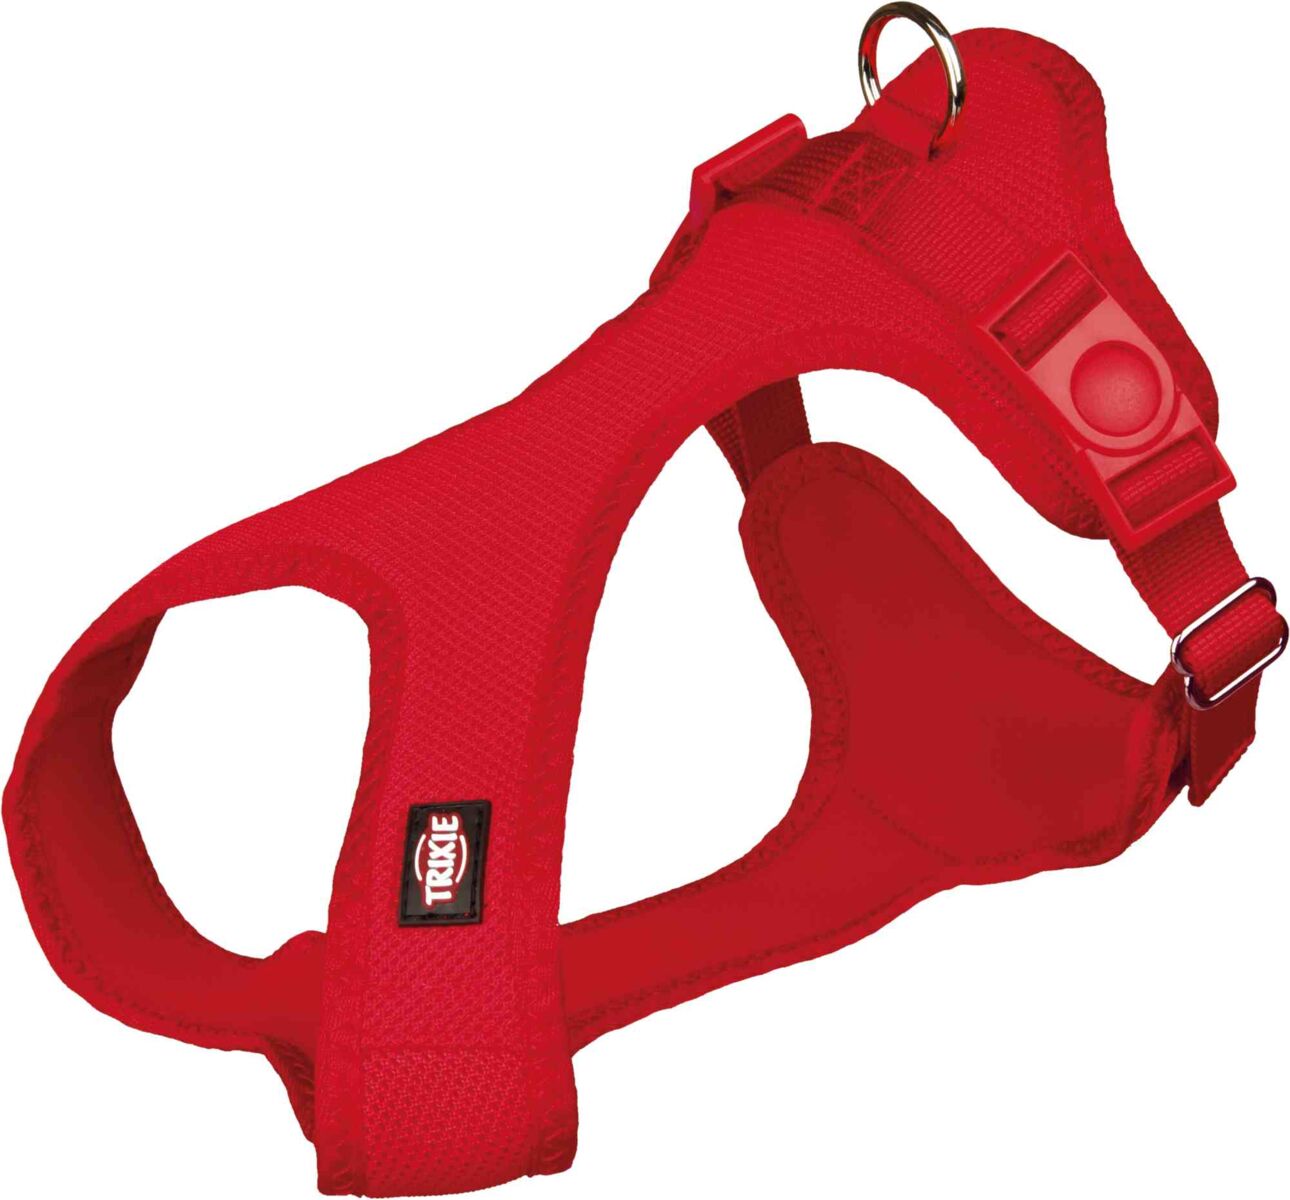 COMFORT SOFT TOURING HARNESS XS-S 30-45CM RED